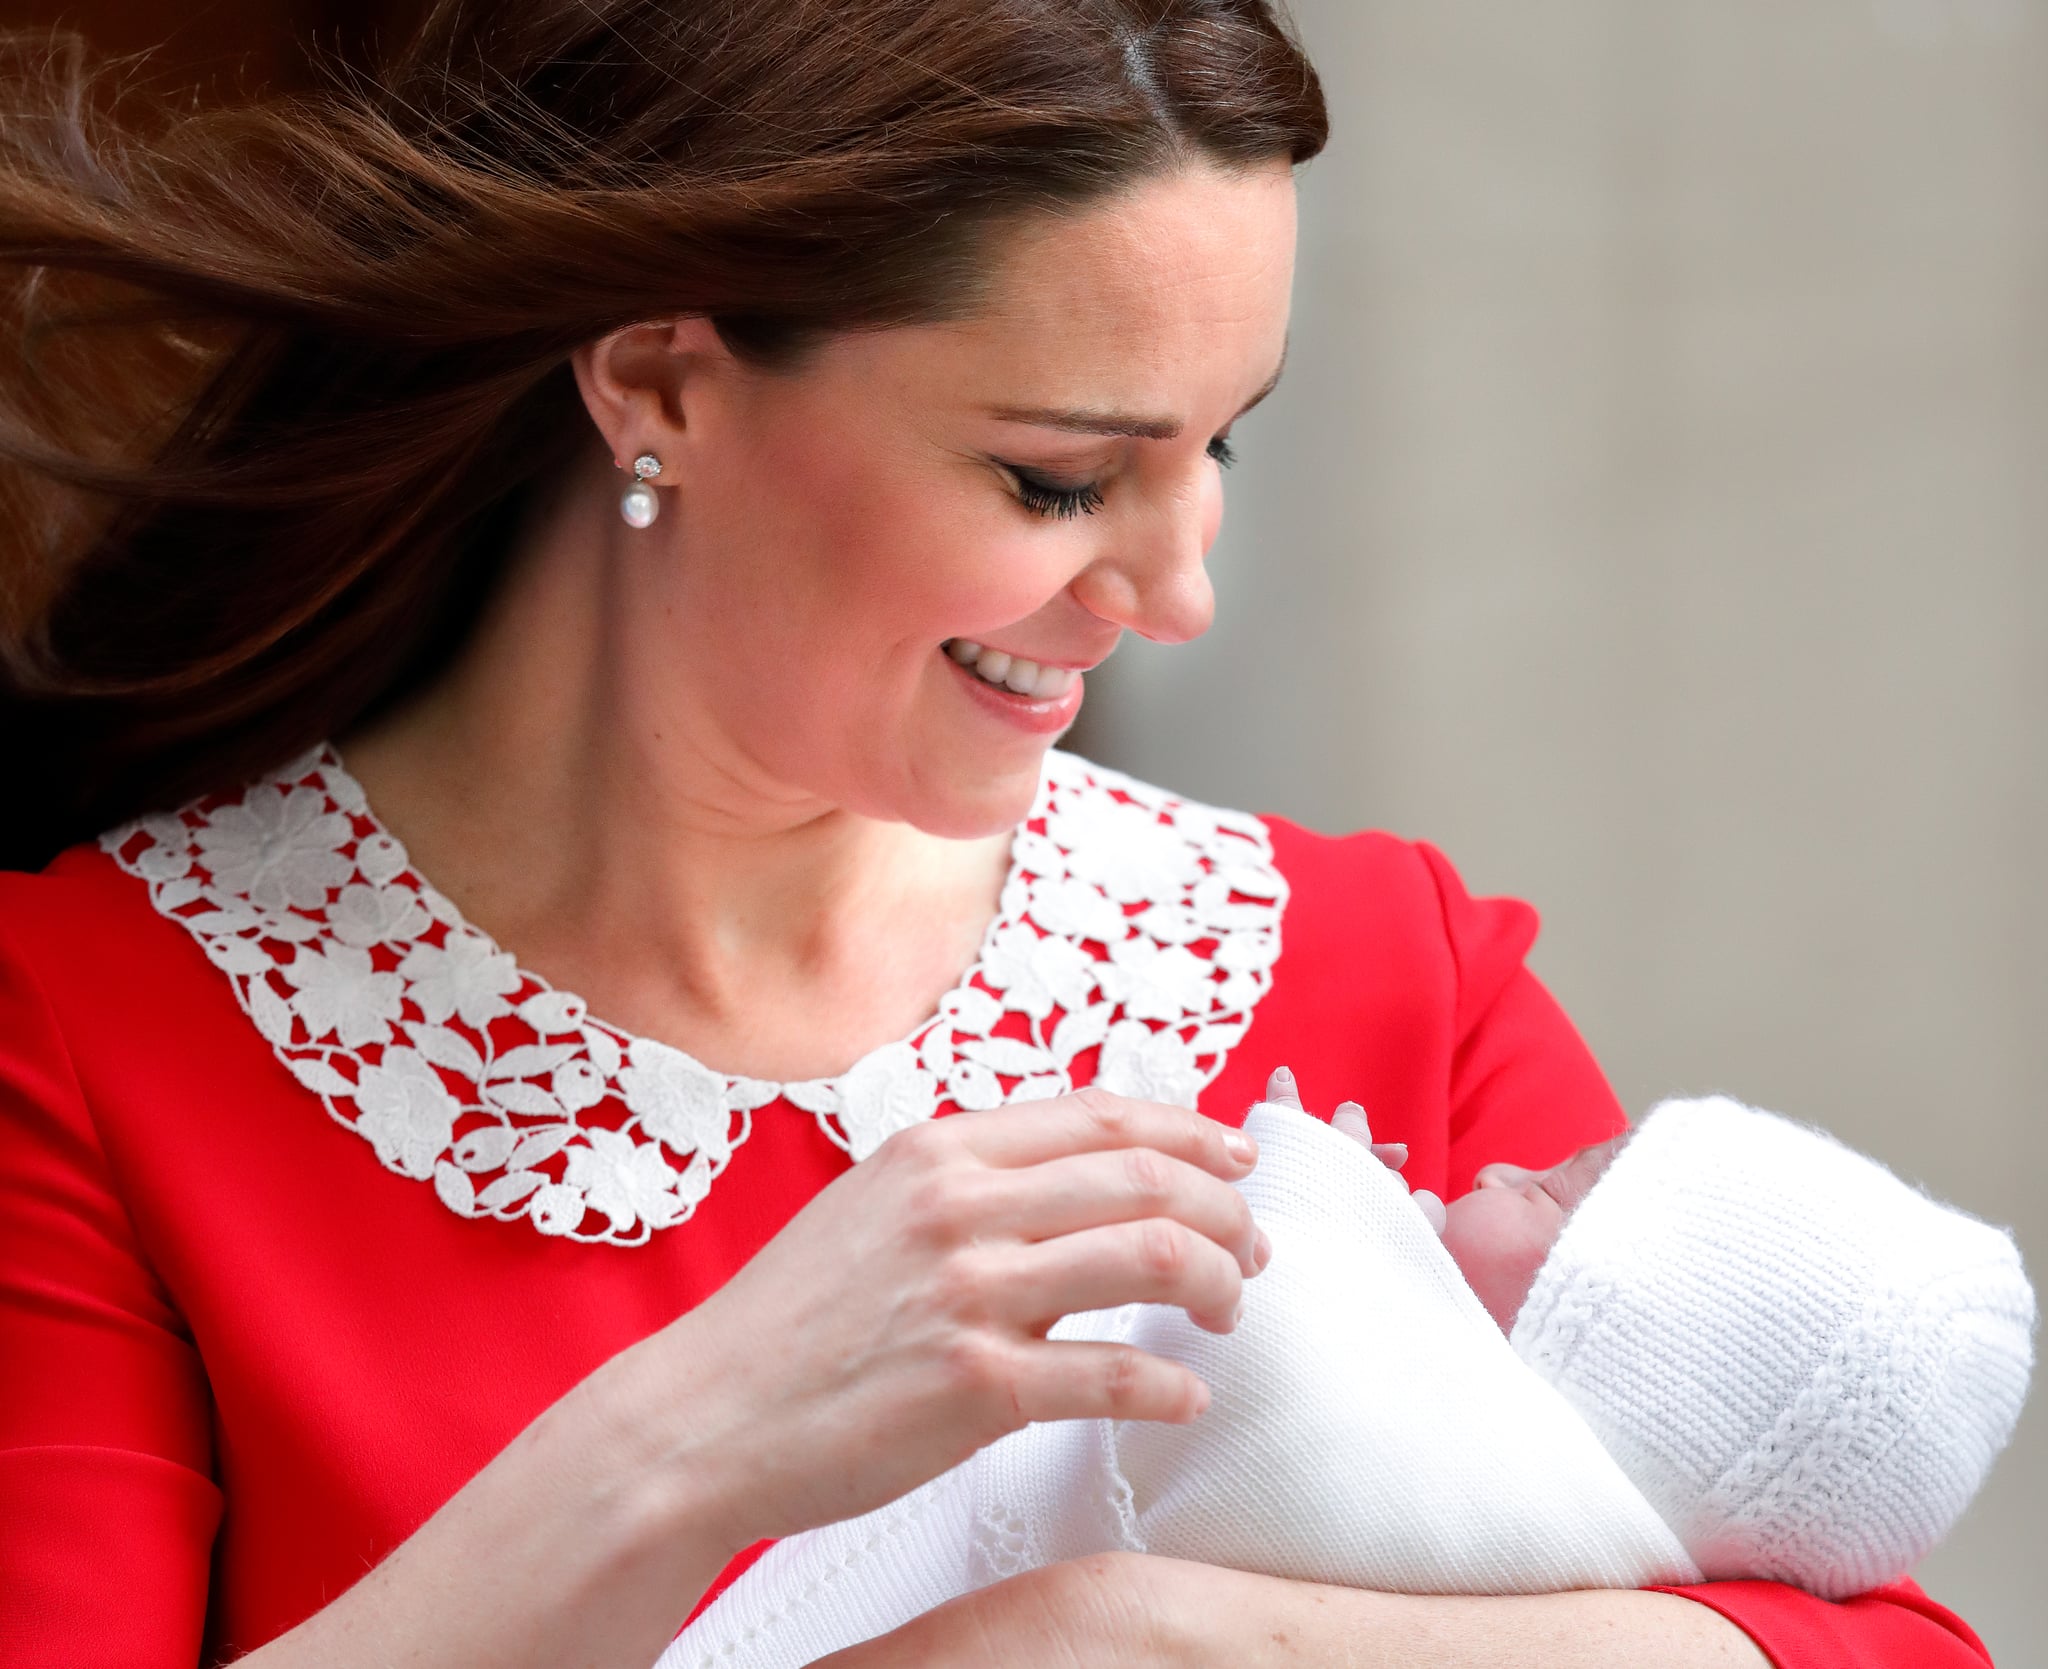 LONDON, UNITED KINGDOM - APRIL 23: (EMBARGOED FOR PUBLICATION IN UK NEWSPAPERS UNTIL 24 HOURS AFTER CREATE DATE AND TIME) Catherine, Duchess of Cambridge departs the Lindo Wing of St Mary's Hospital with her newborn baby son on April 23, 2018 in London, England. The Duchess delivered a boy at 11:01 am, weighing 8lbs 7oz, who will be fifth in line to the throne. (Photo by Max Mumby/Indigo/Getty Images)